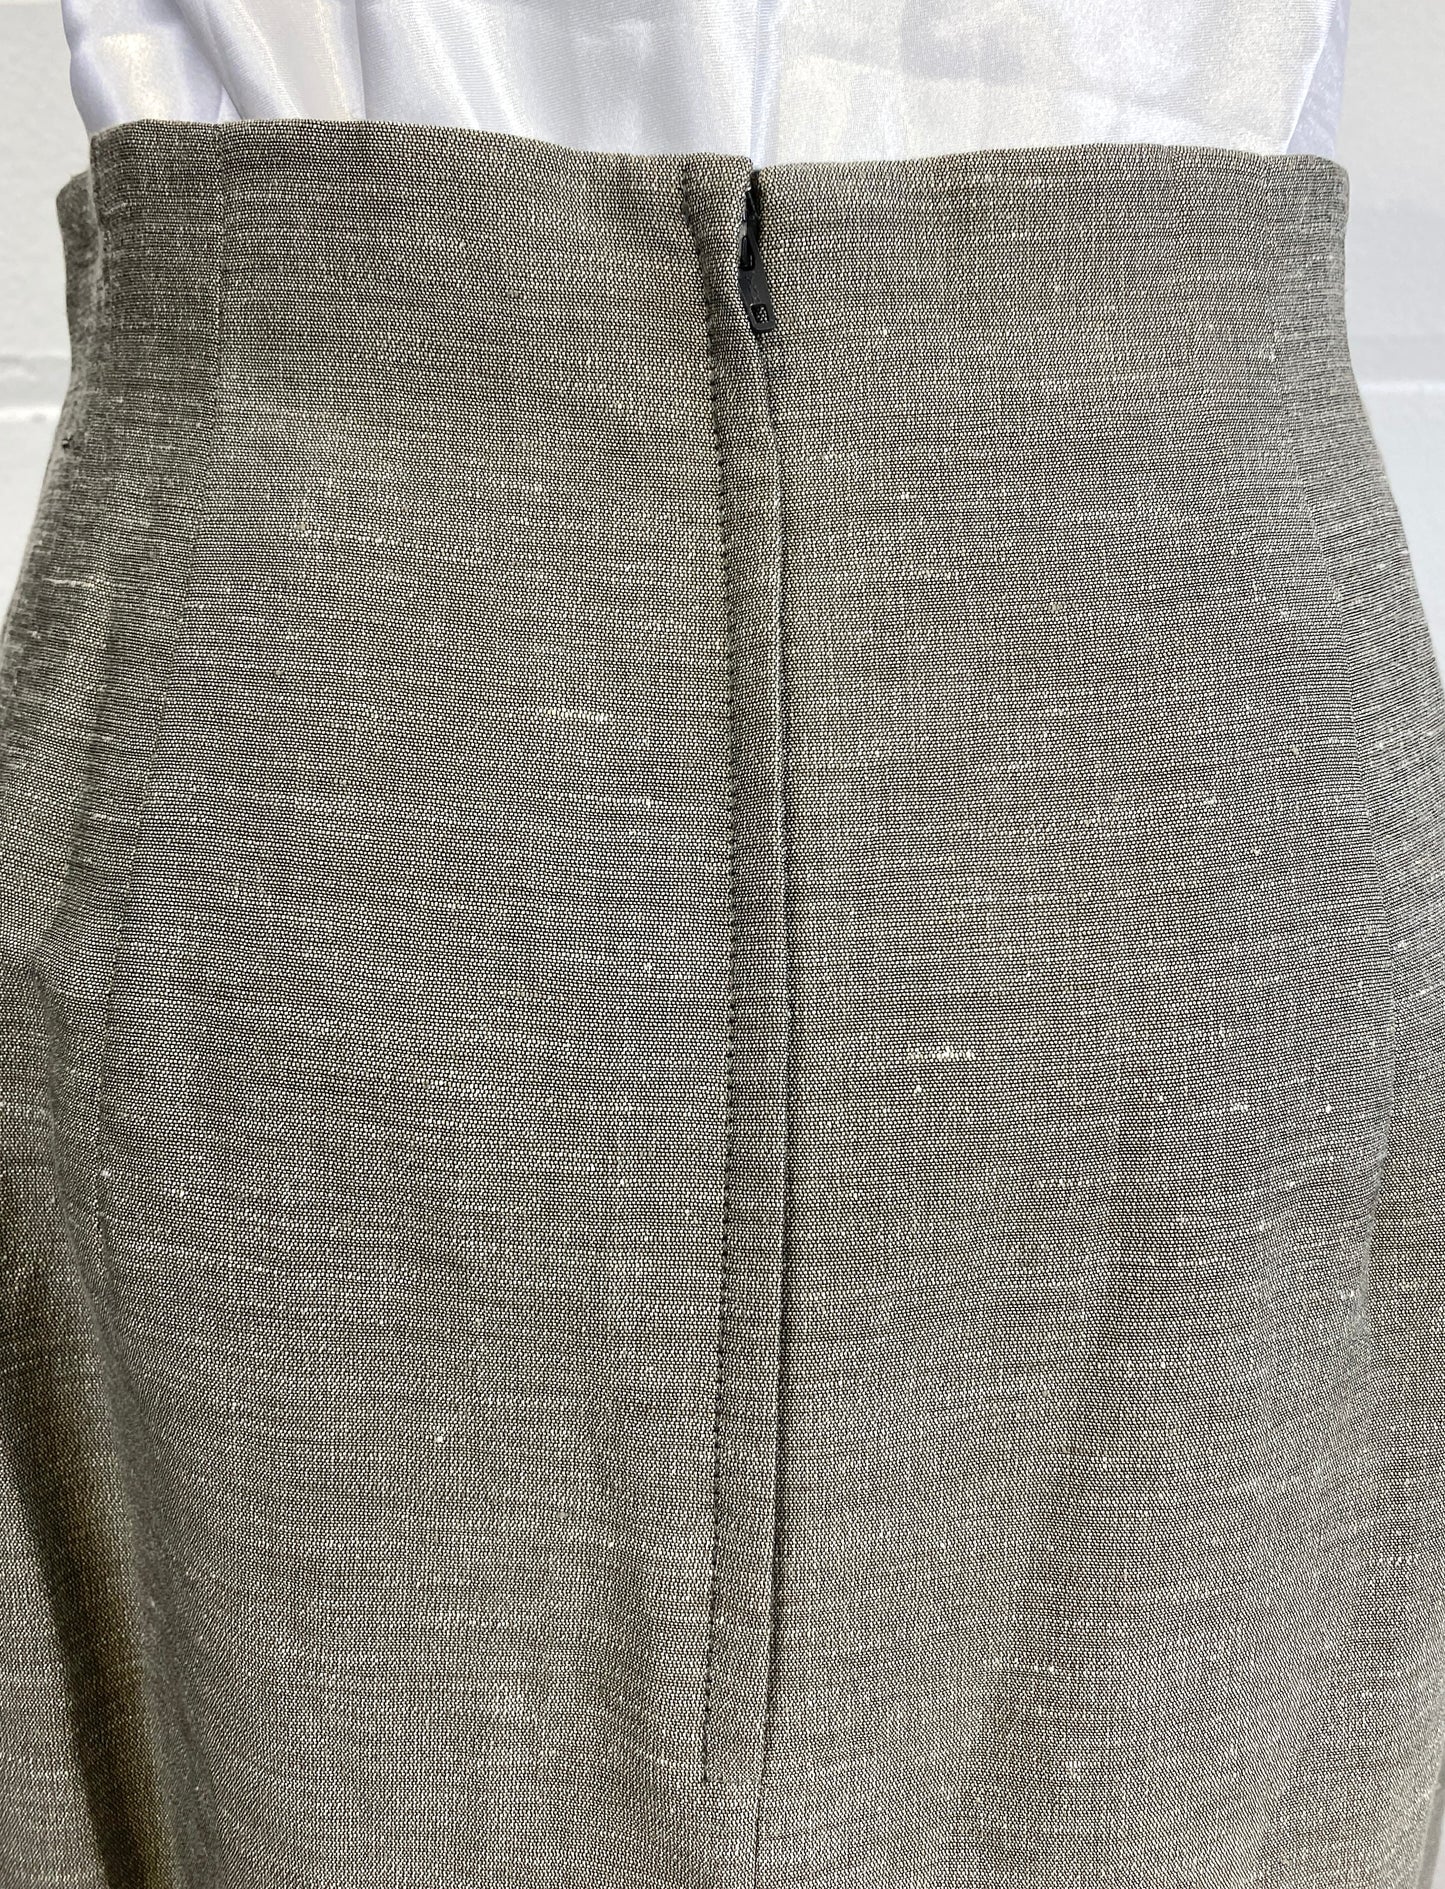 Vintage 1980s/90s Sunny Choi Grey Linen Pencil Skirt, Small